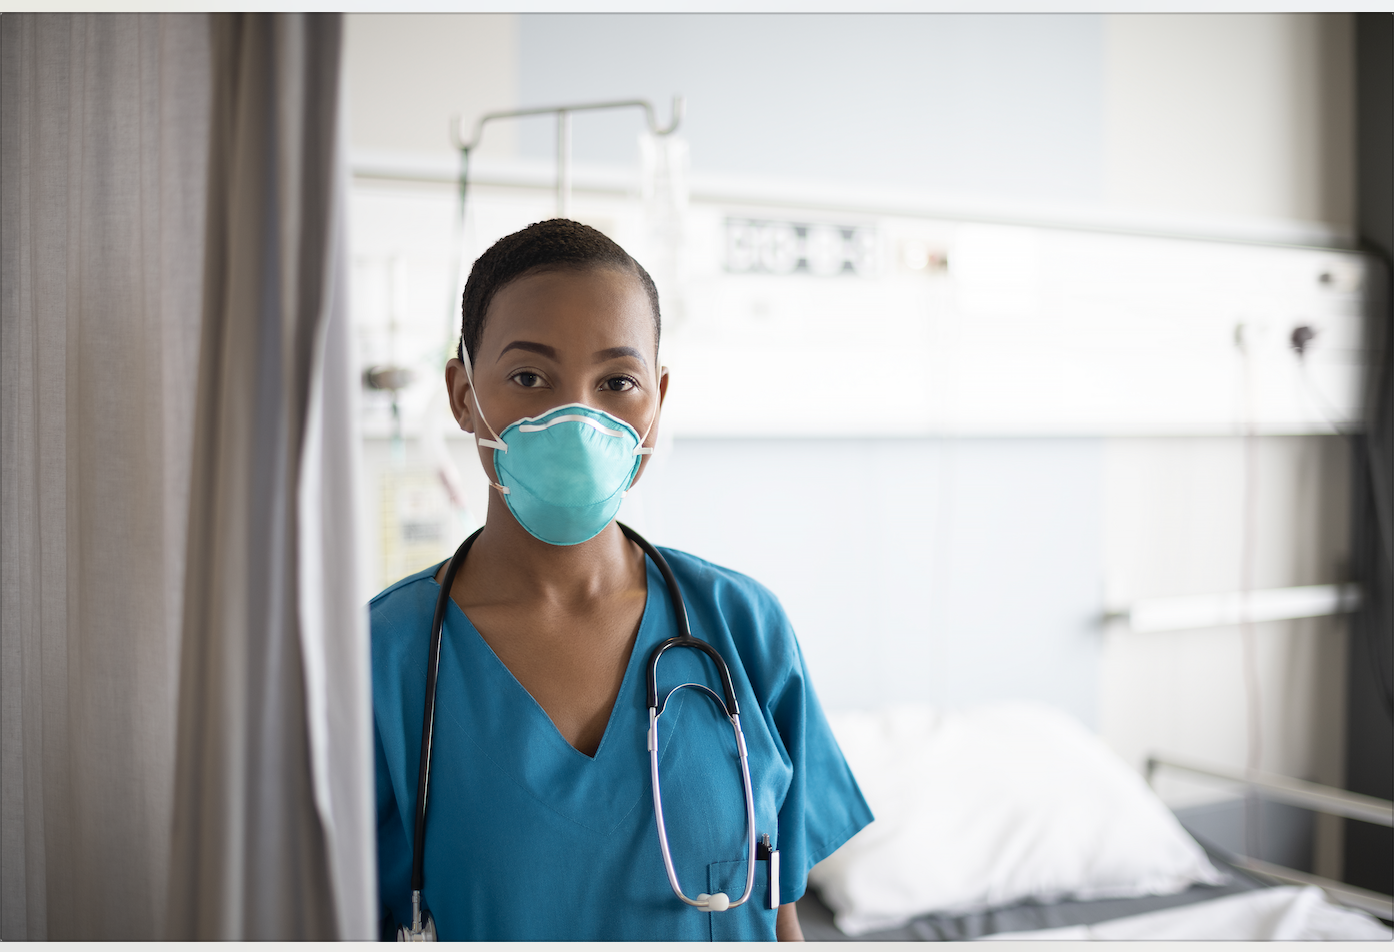 This is a photo of a nurse wearing an N-95 mask and standing by hospital curtains. KleenEdge and CME Corp partner to present Smart Curtain technology.